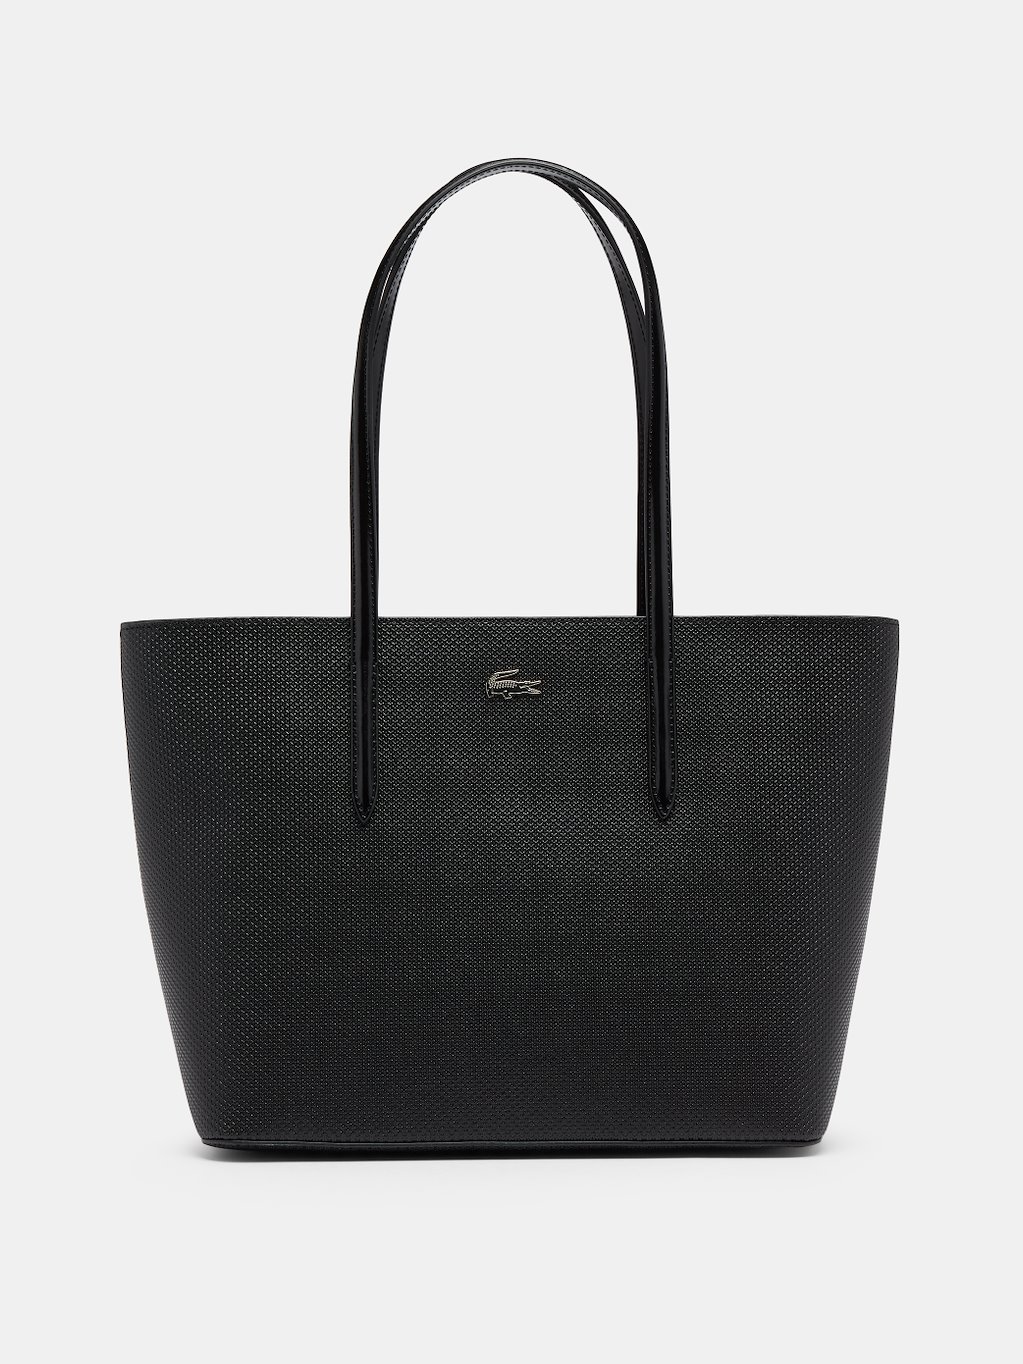 Malas Lacoste Shopping Bag Zip | STYLE-OUT